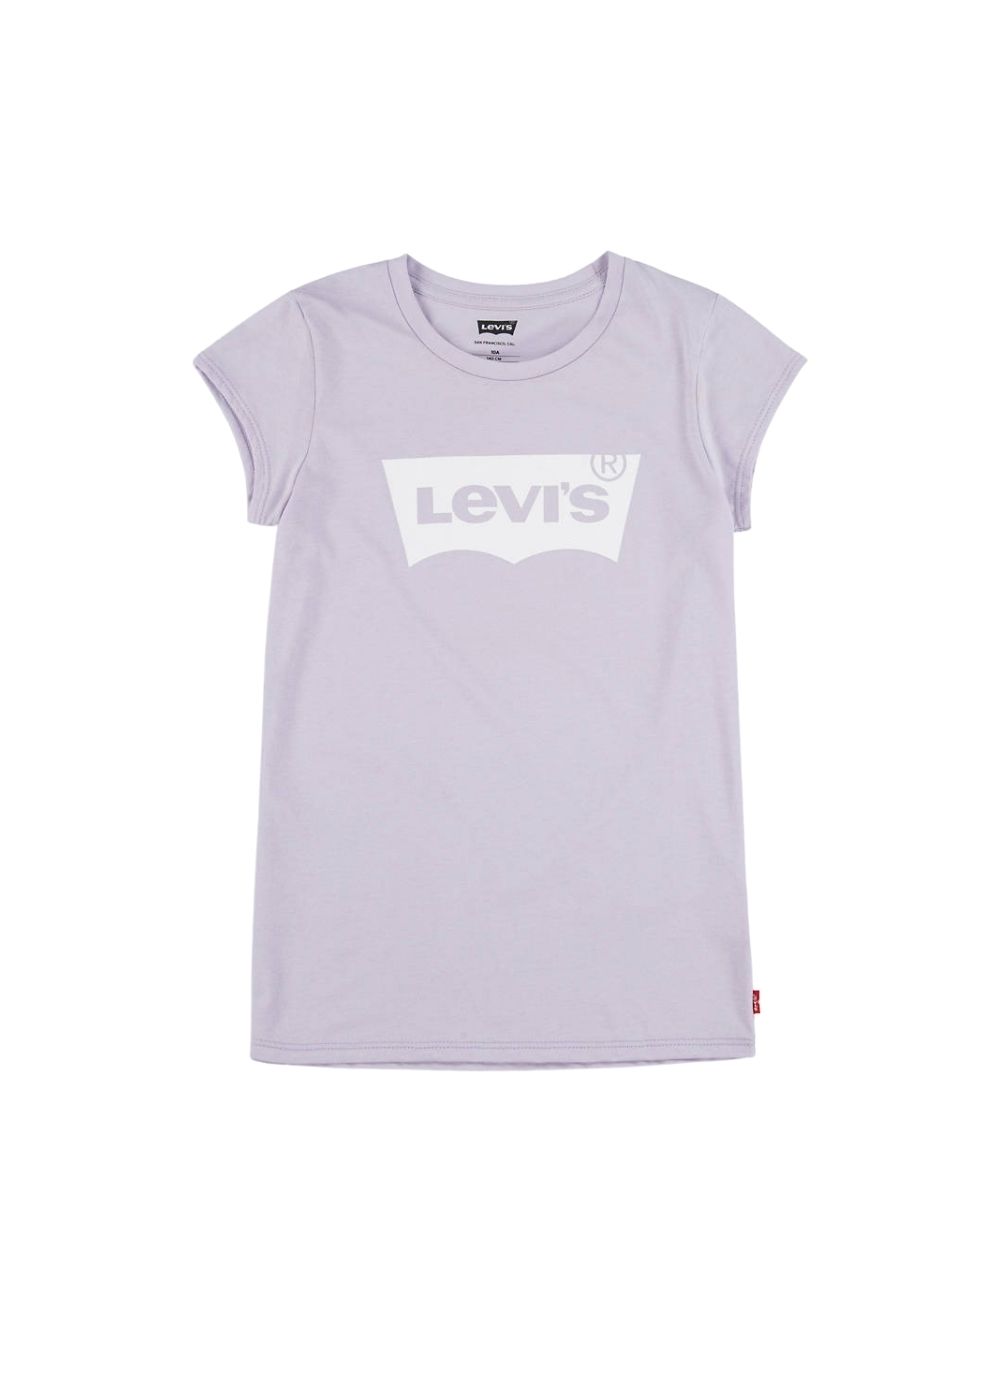 Featured image for “Levi's T-shirt lilla”